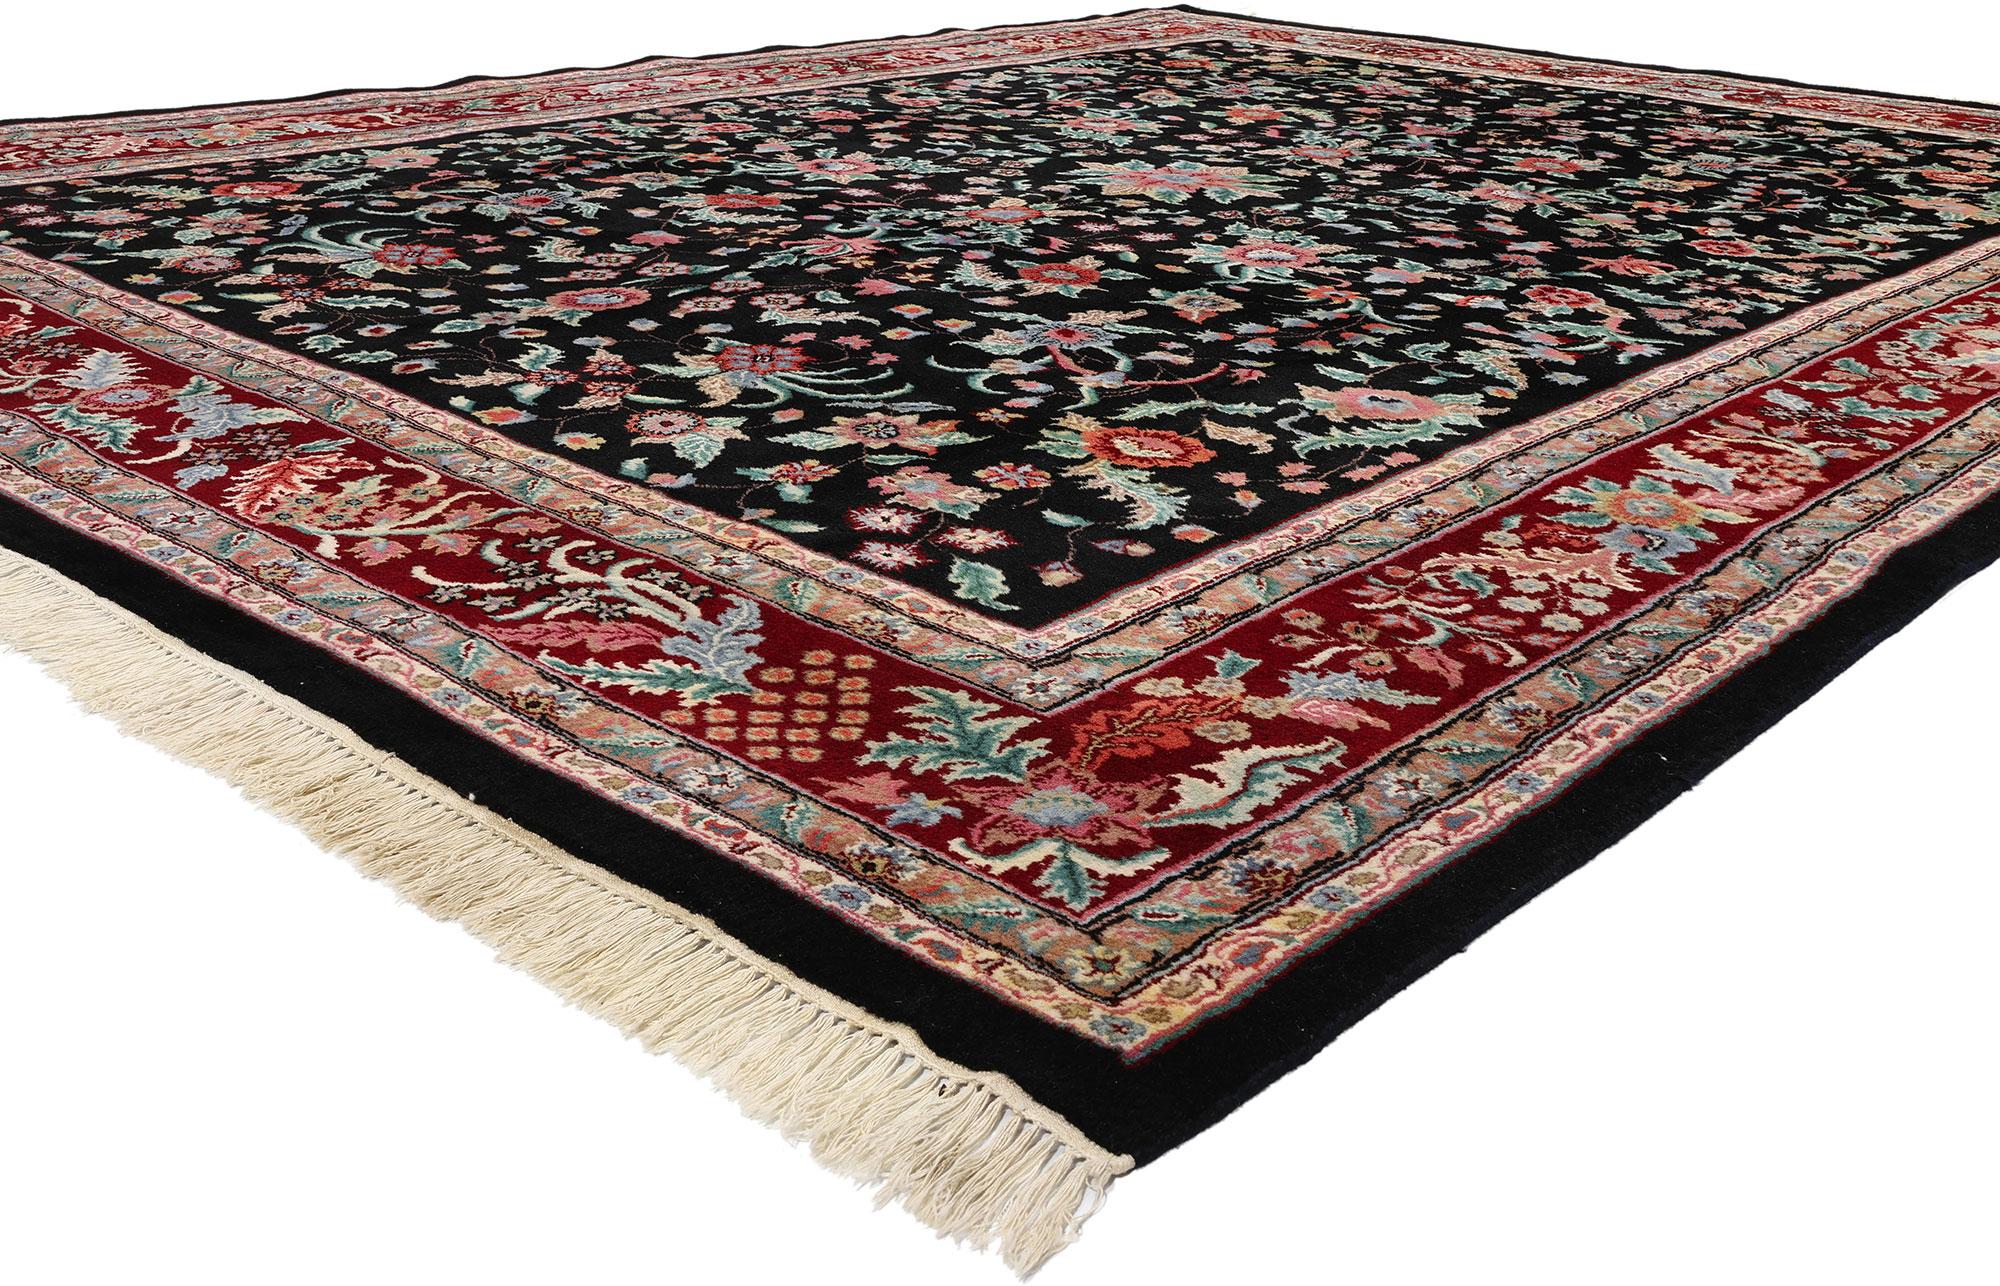 78706 Vintage Black Indian Floral Rug, 09'00 x 12'00. Timeless grace meets classic sophistication in this meticulously hand-knotted wool vintage modern Indian floral rug, unveiling an exquisite narrative of contemporary elegance. Against a beguiling